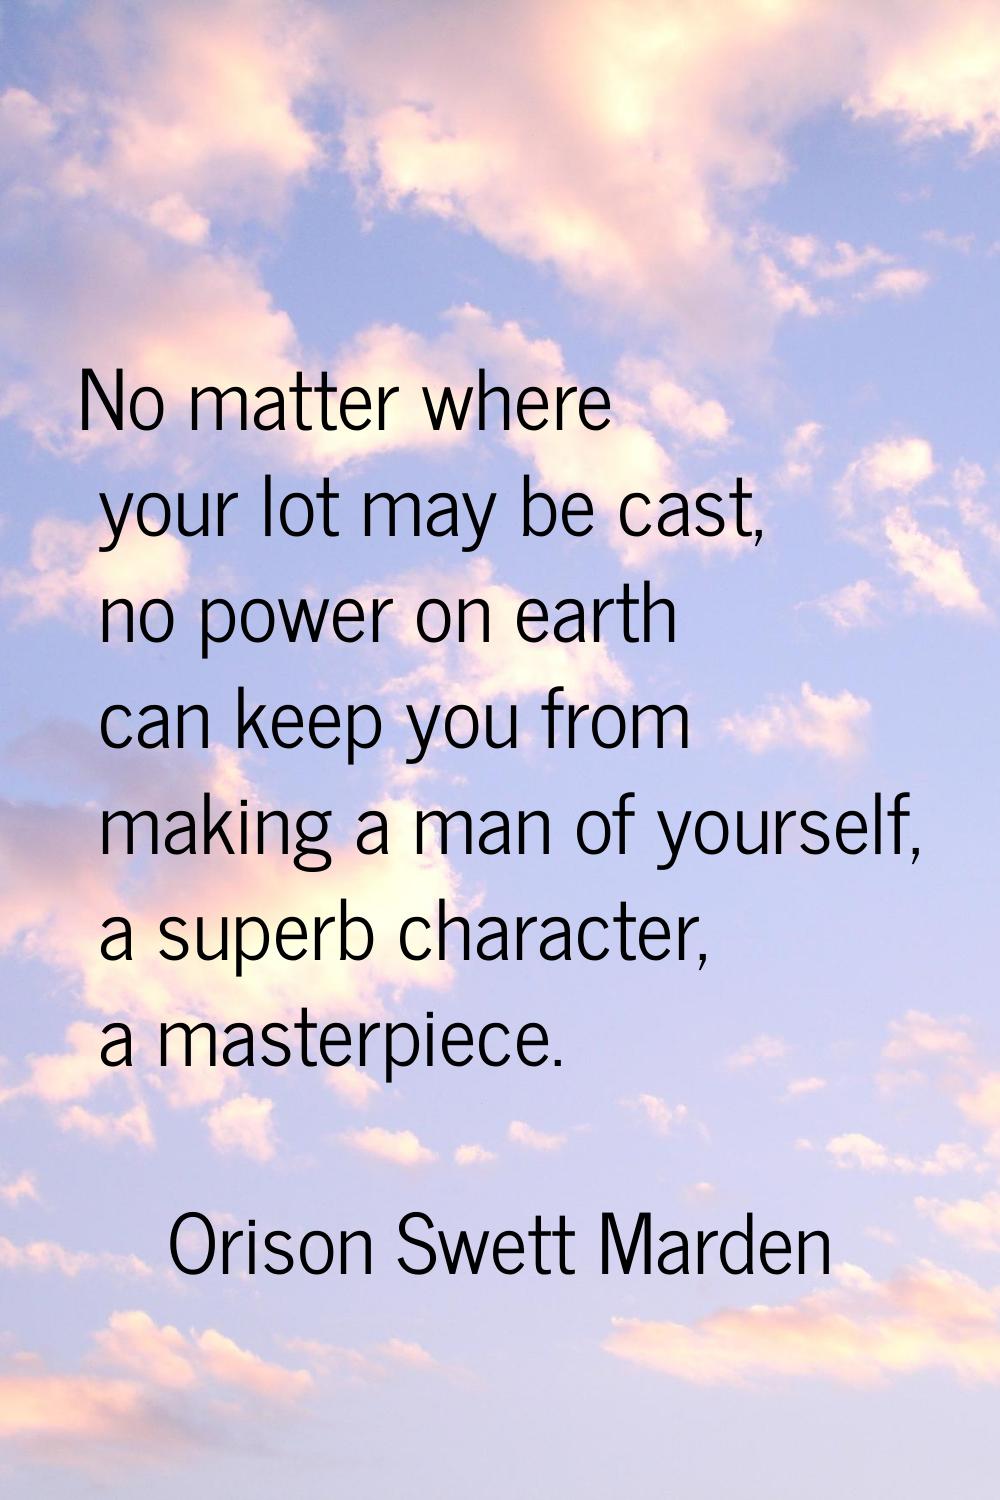 No matter where your lot may be cast, no power on earth can keep you from making a man of yourself,